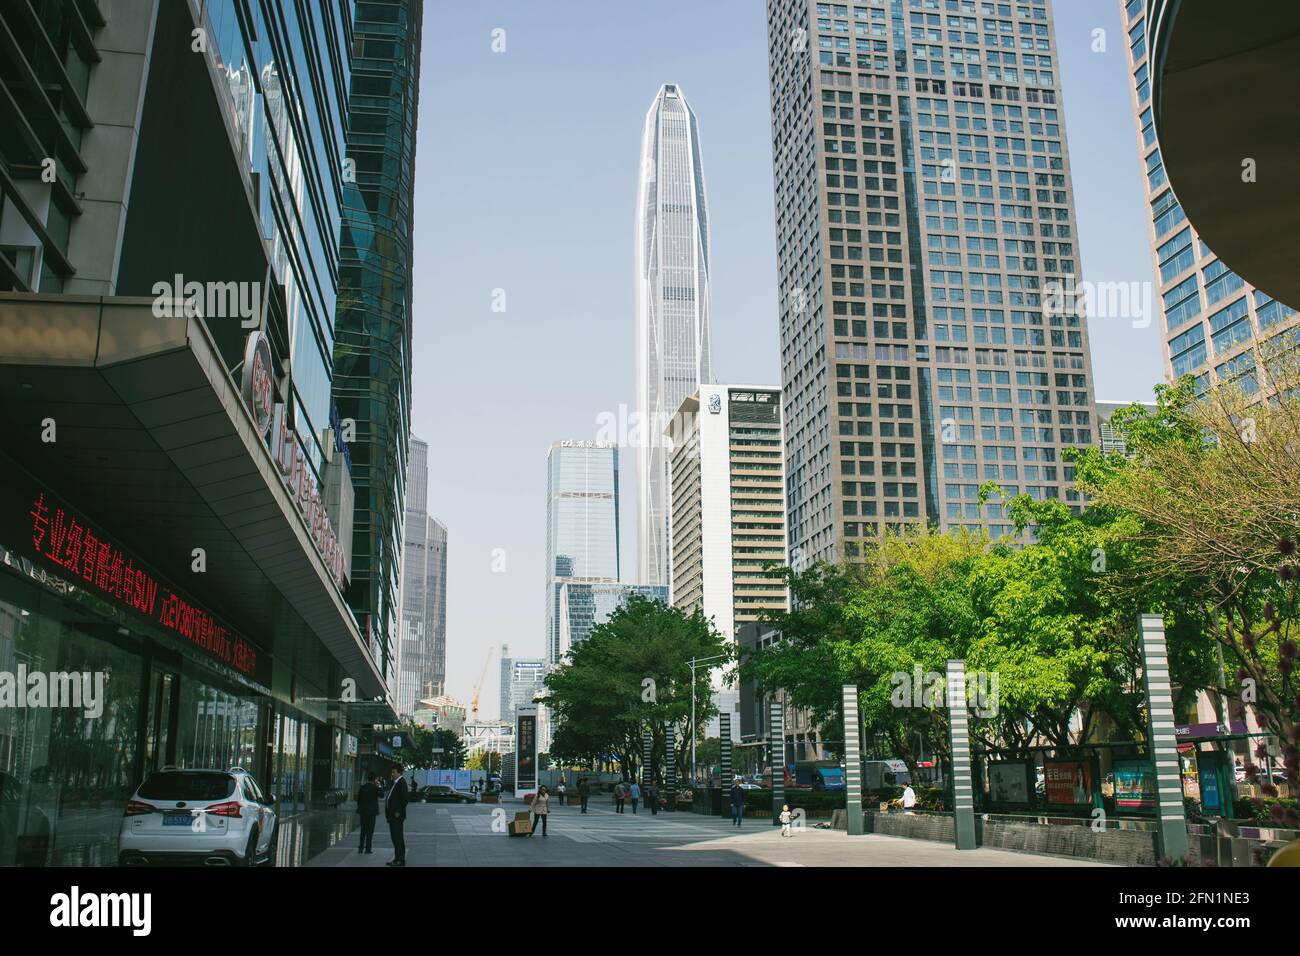 China city Shenzhen street landscape with skyscrapers. Stock Photo